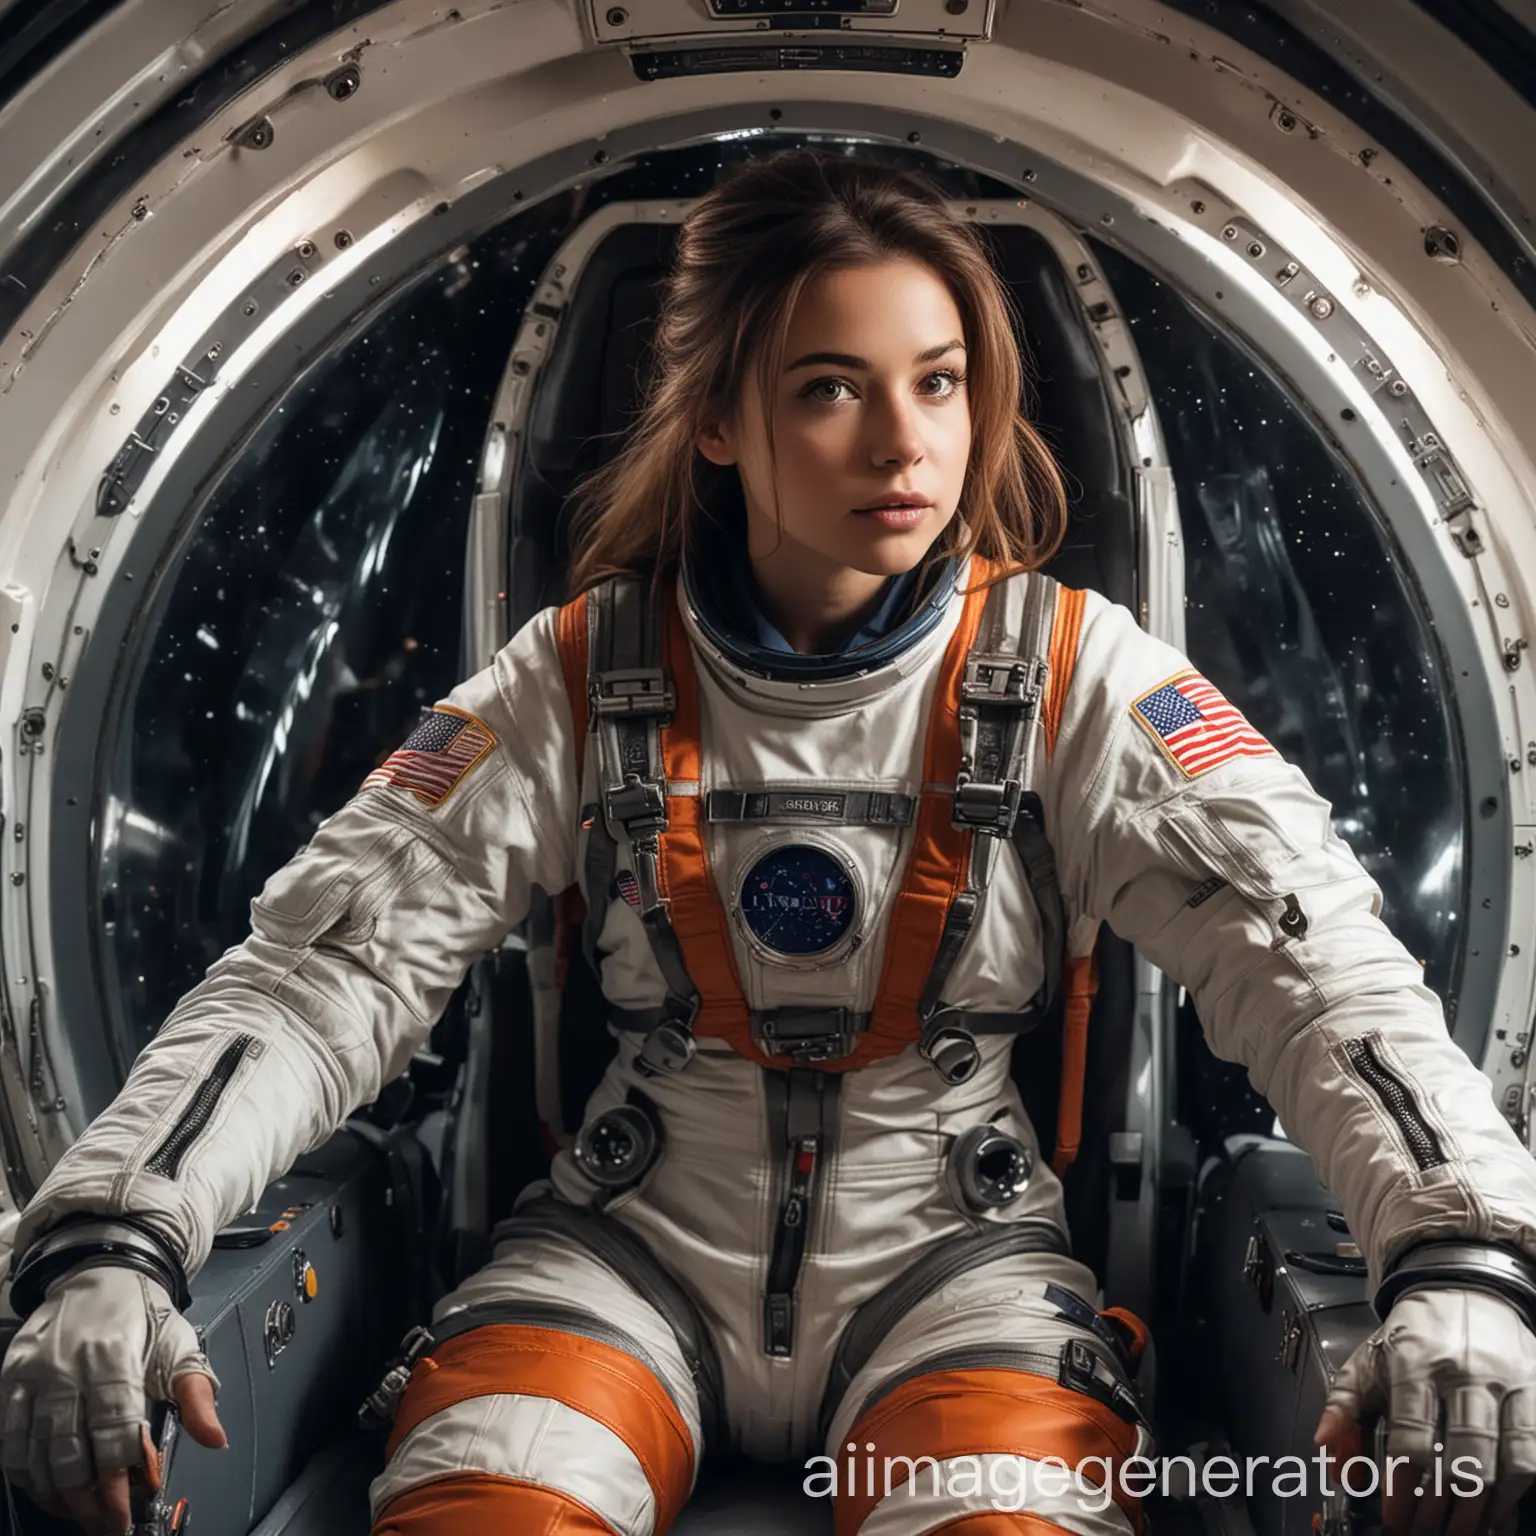 a hot girl astronaut in her rocket ship looking bravely preparing in her seat to go light speed with her full space suit on